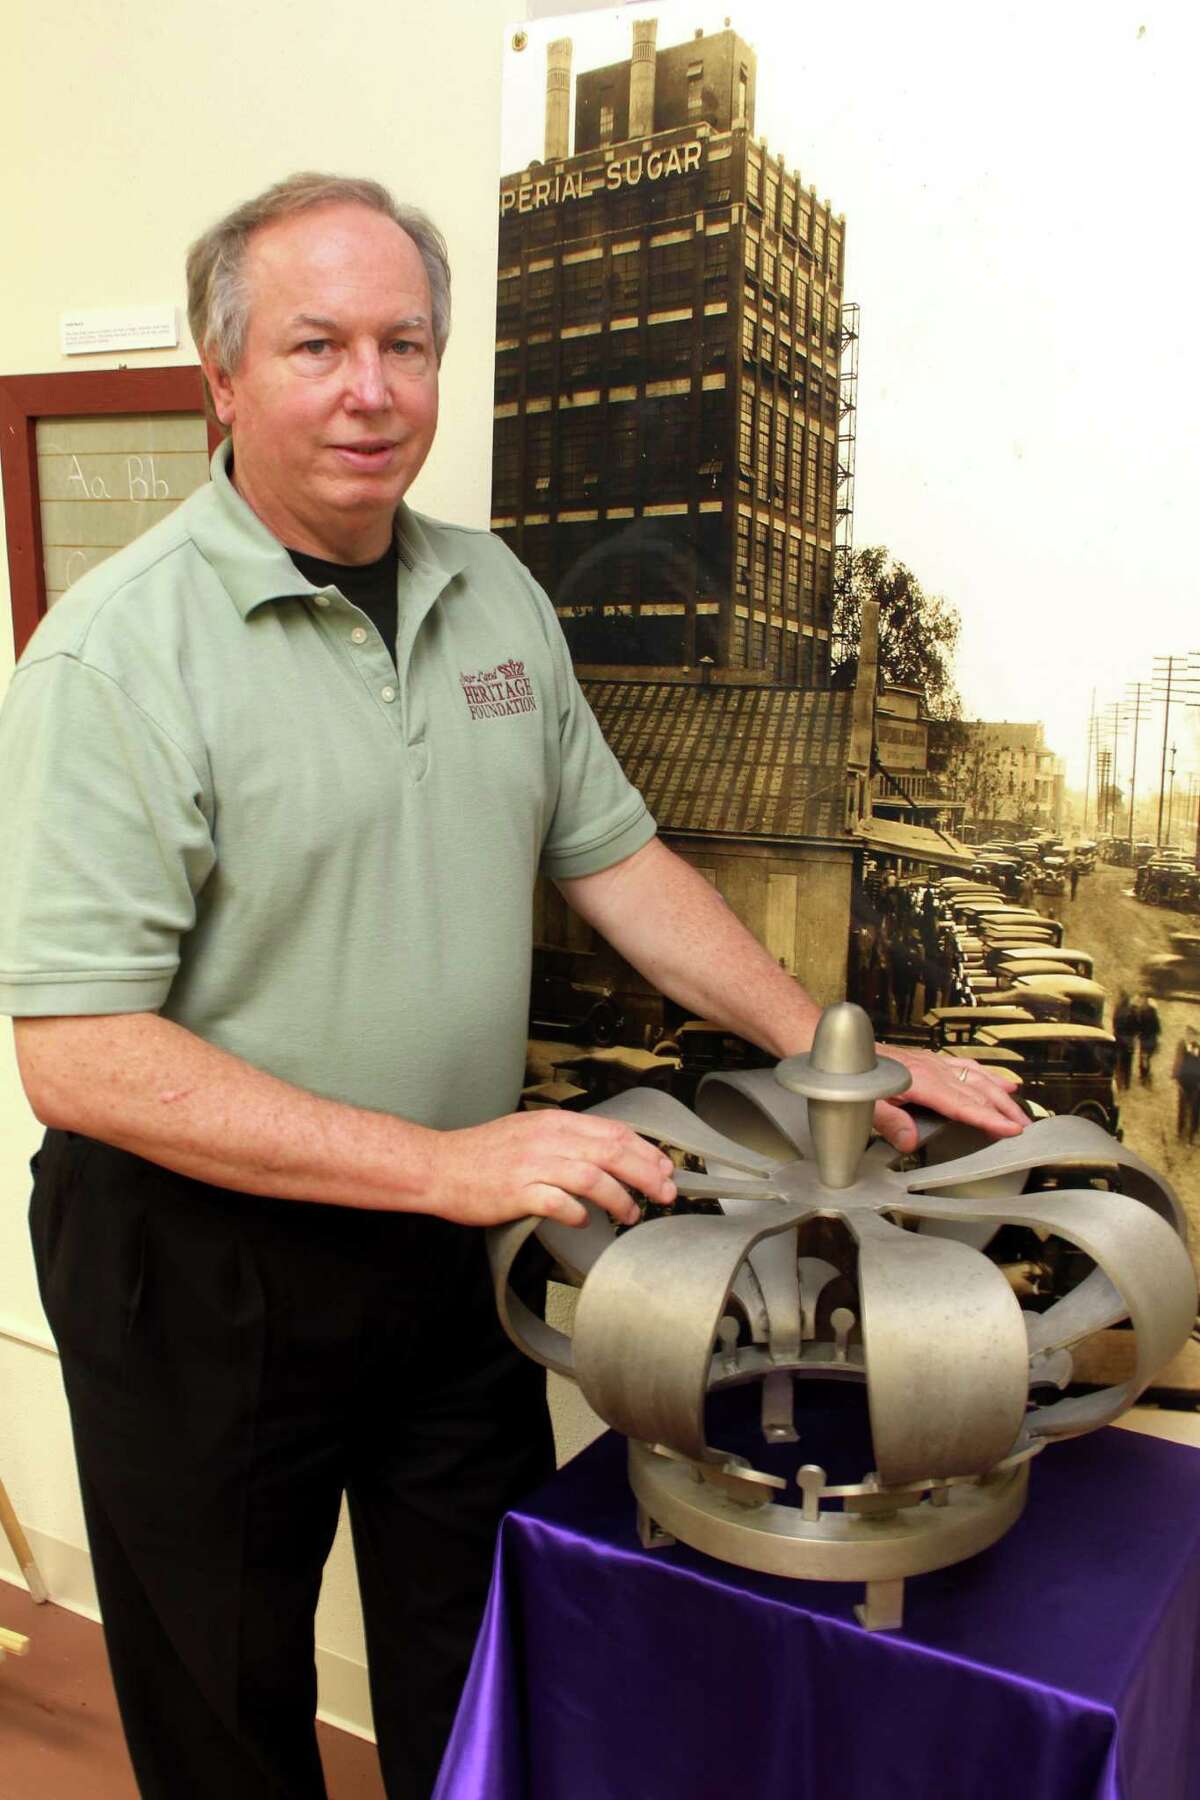 Dennis C. Parmer, Executive Director, Sugar Land Heritage Foundation, stands beside one of two Imperial crowns; one crown stood at the gate entrance as workers entered the refinery. Near the closing of the refinery, the other crown disappeared. At the new planned development, a 6-foot crown replica will be used at the main entrance of State Highway 6.